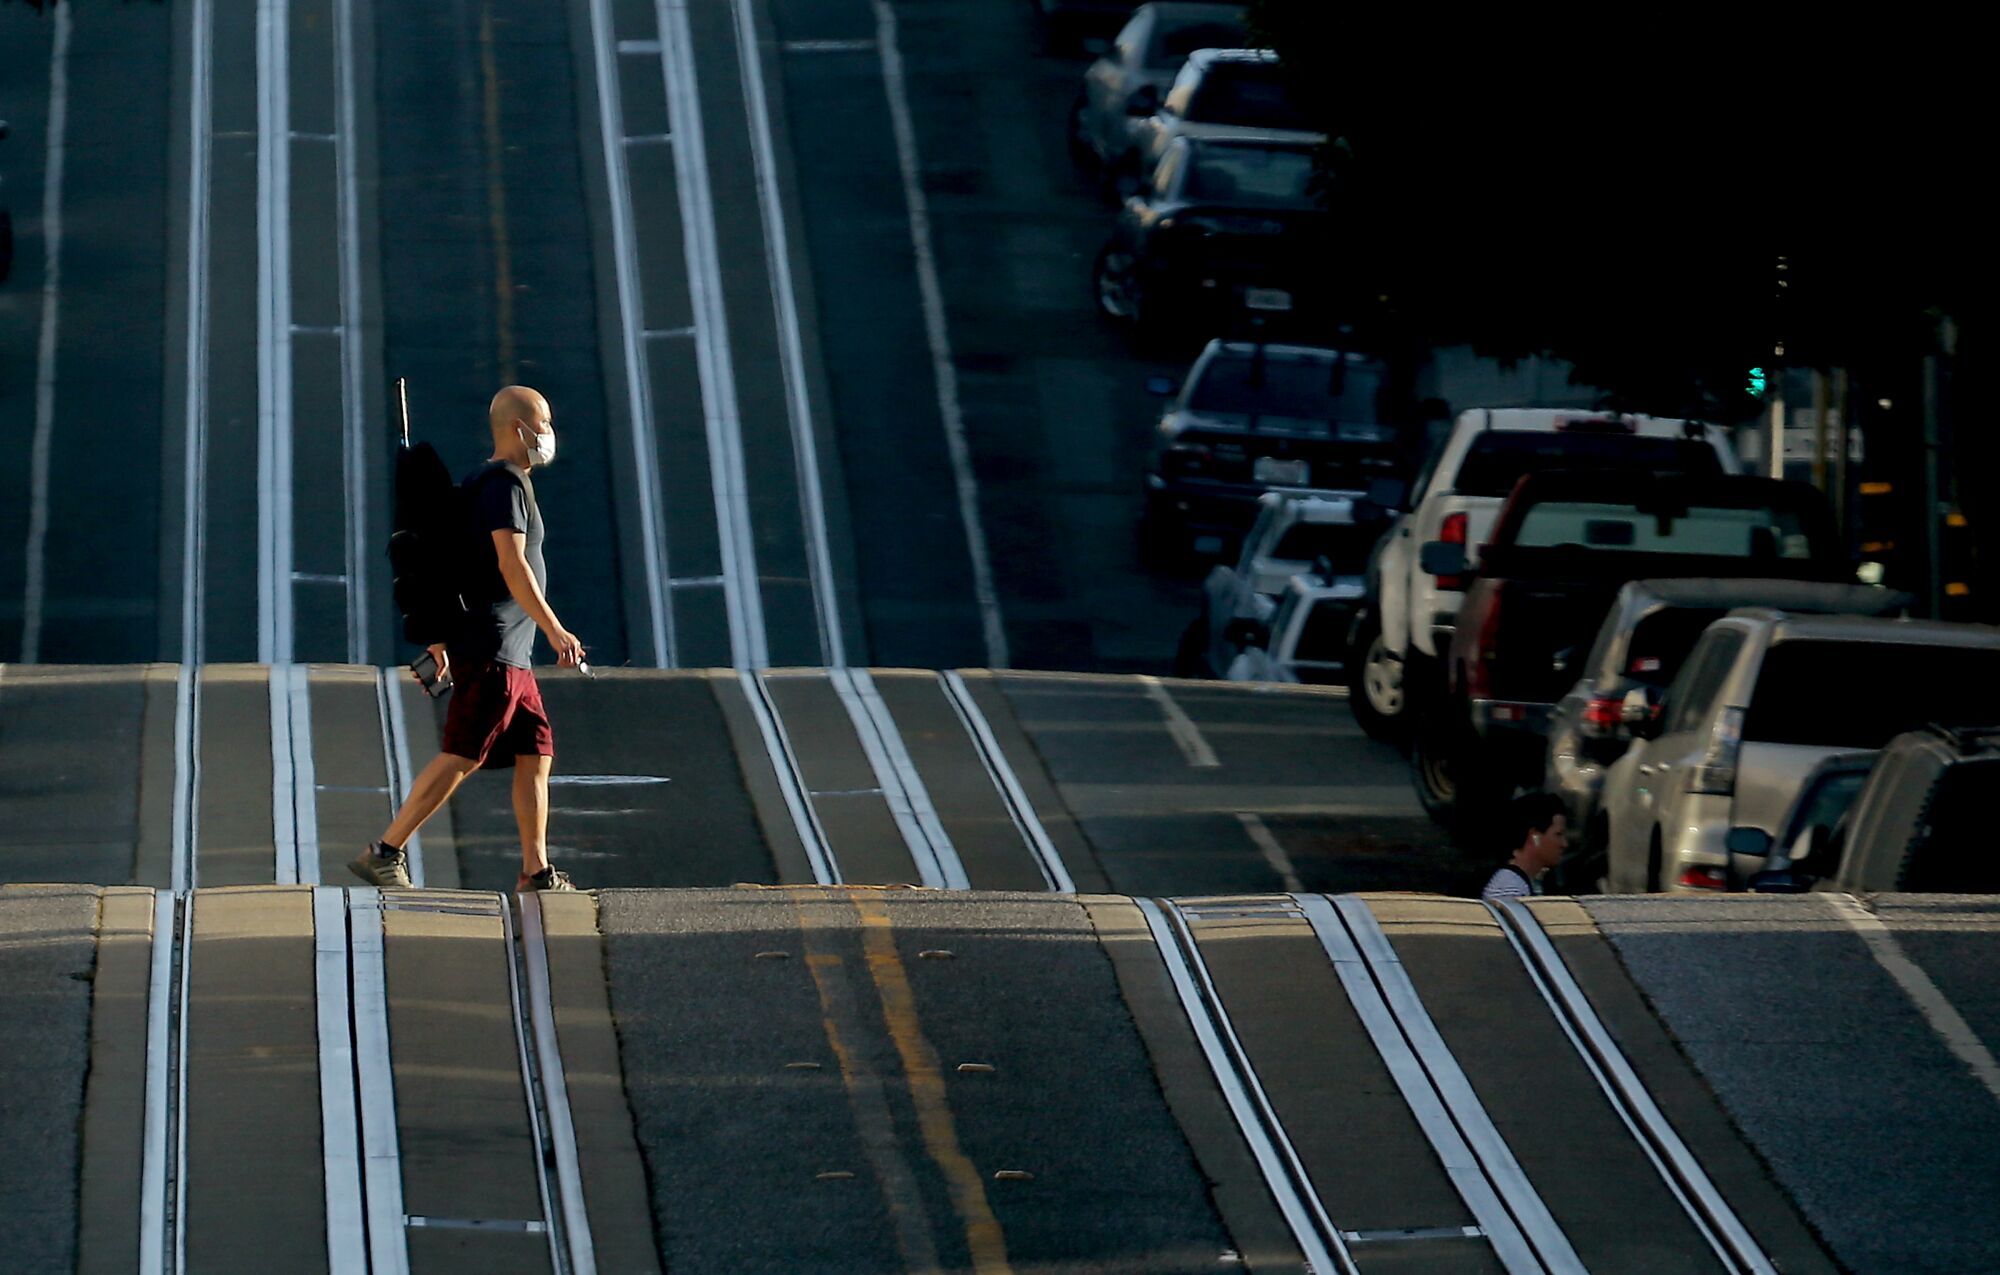 A pedestrian crosses cable car tracks in the North Beach neighborhood of San Francisco.